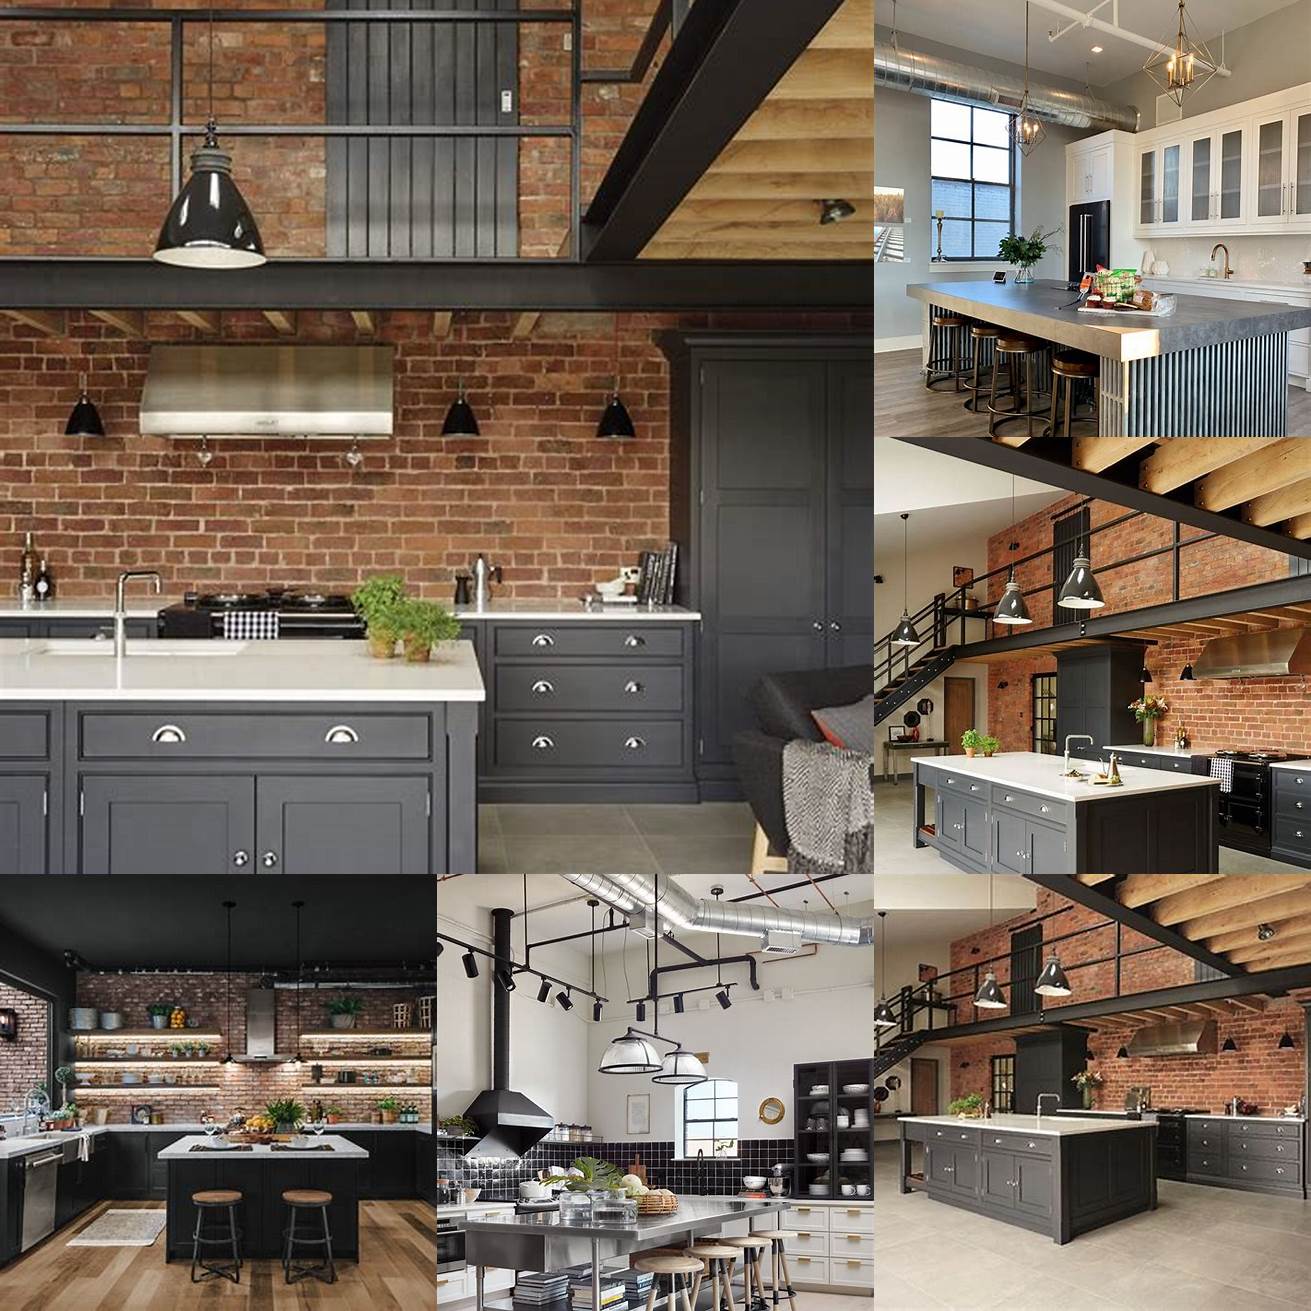 High-quality appliances in an industrial kitchen